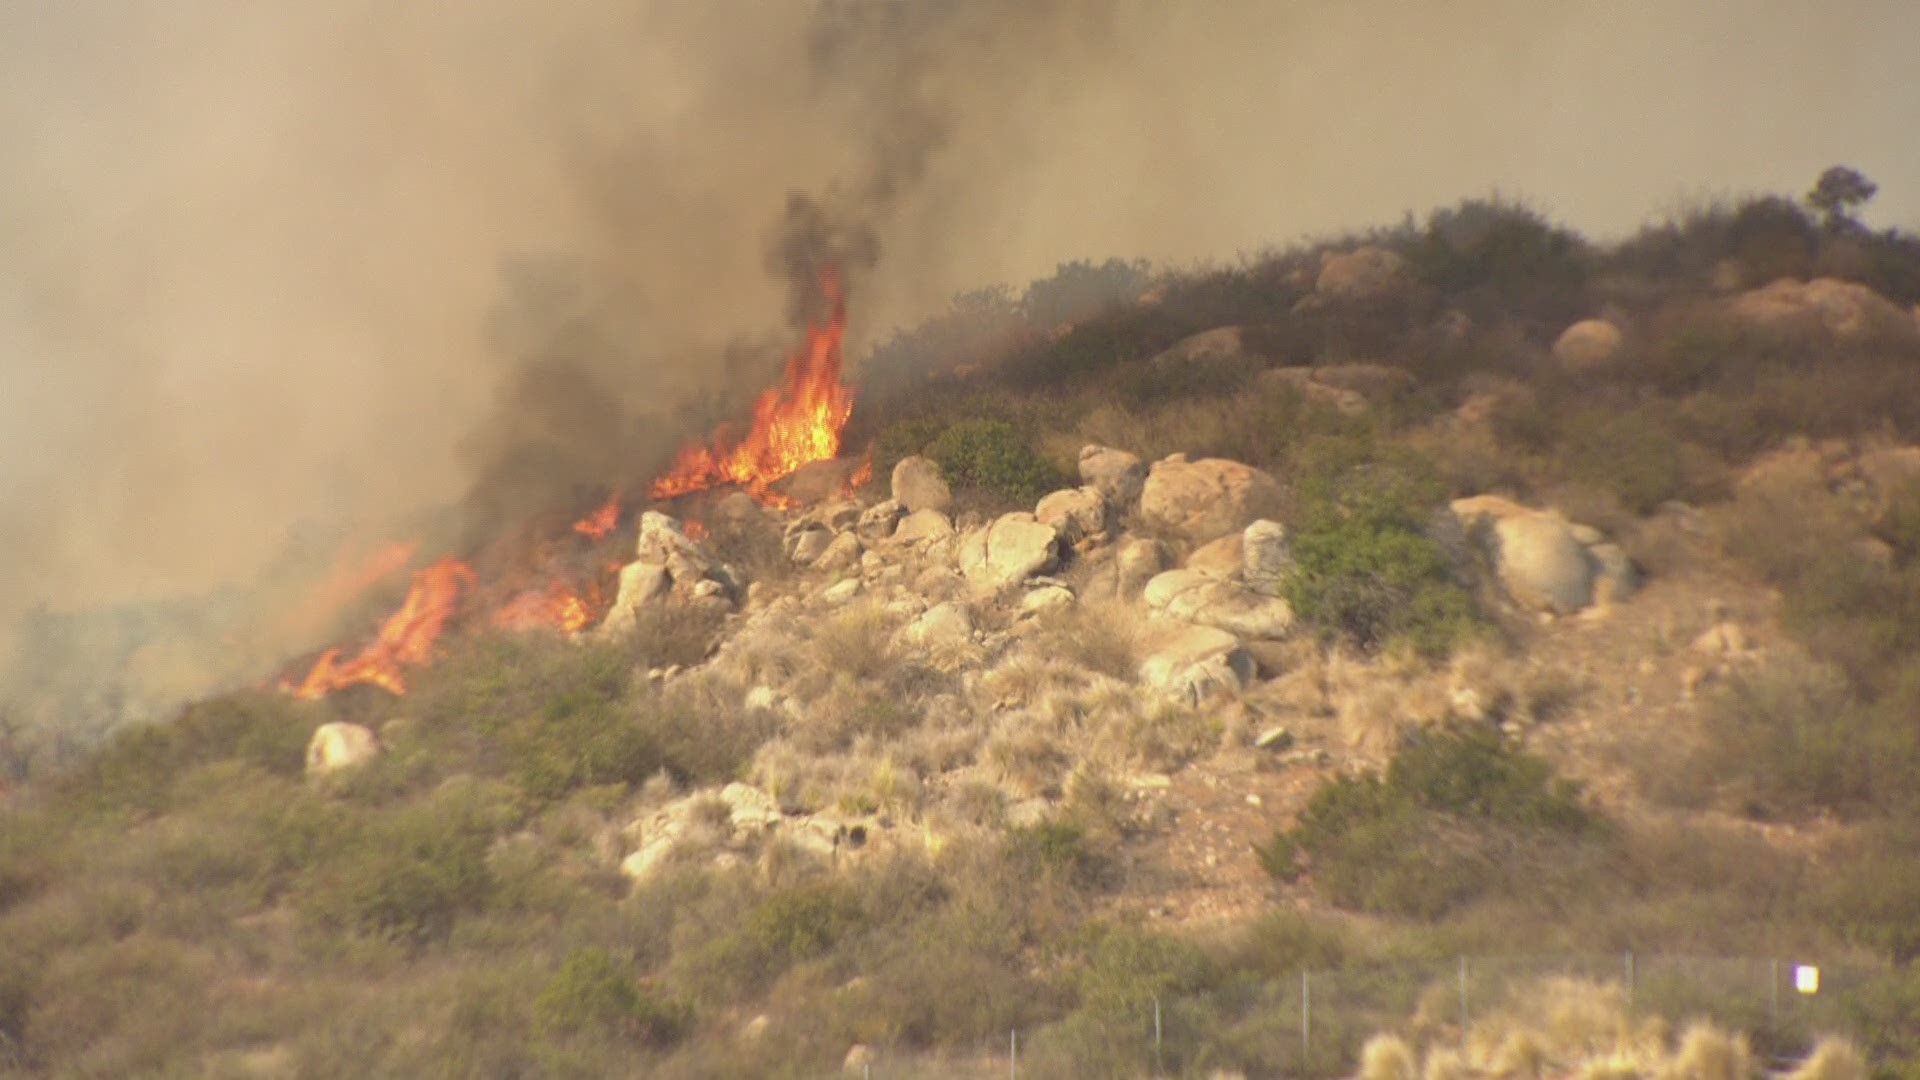 A brush fire broke out Thursday afternoon in the area of Palomar College in San Marcos.